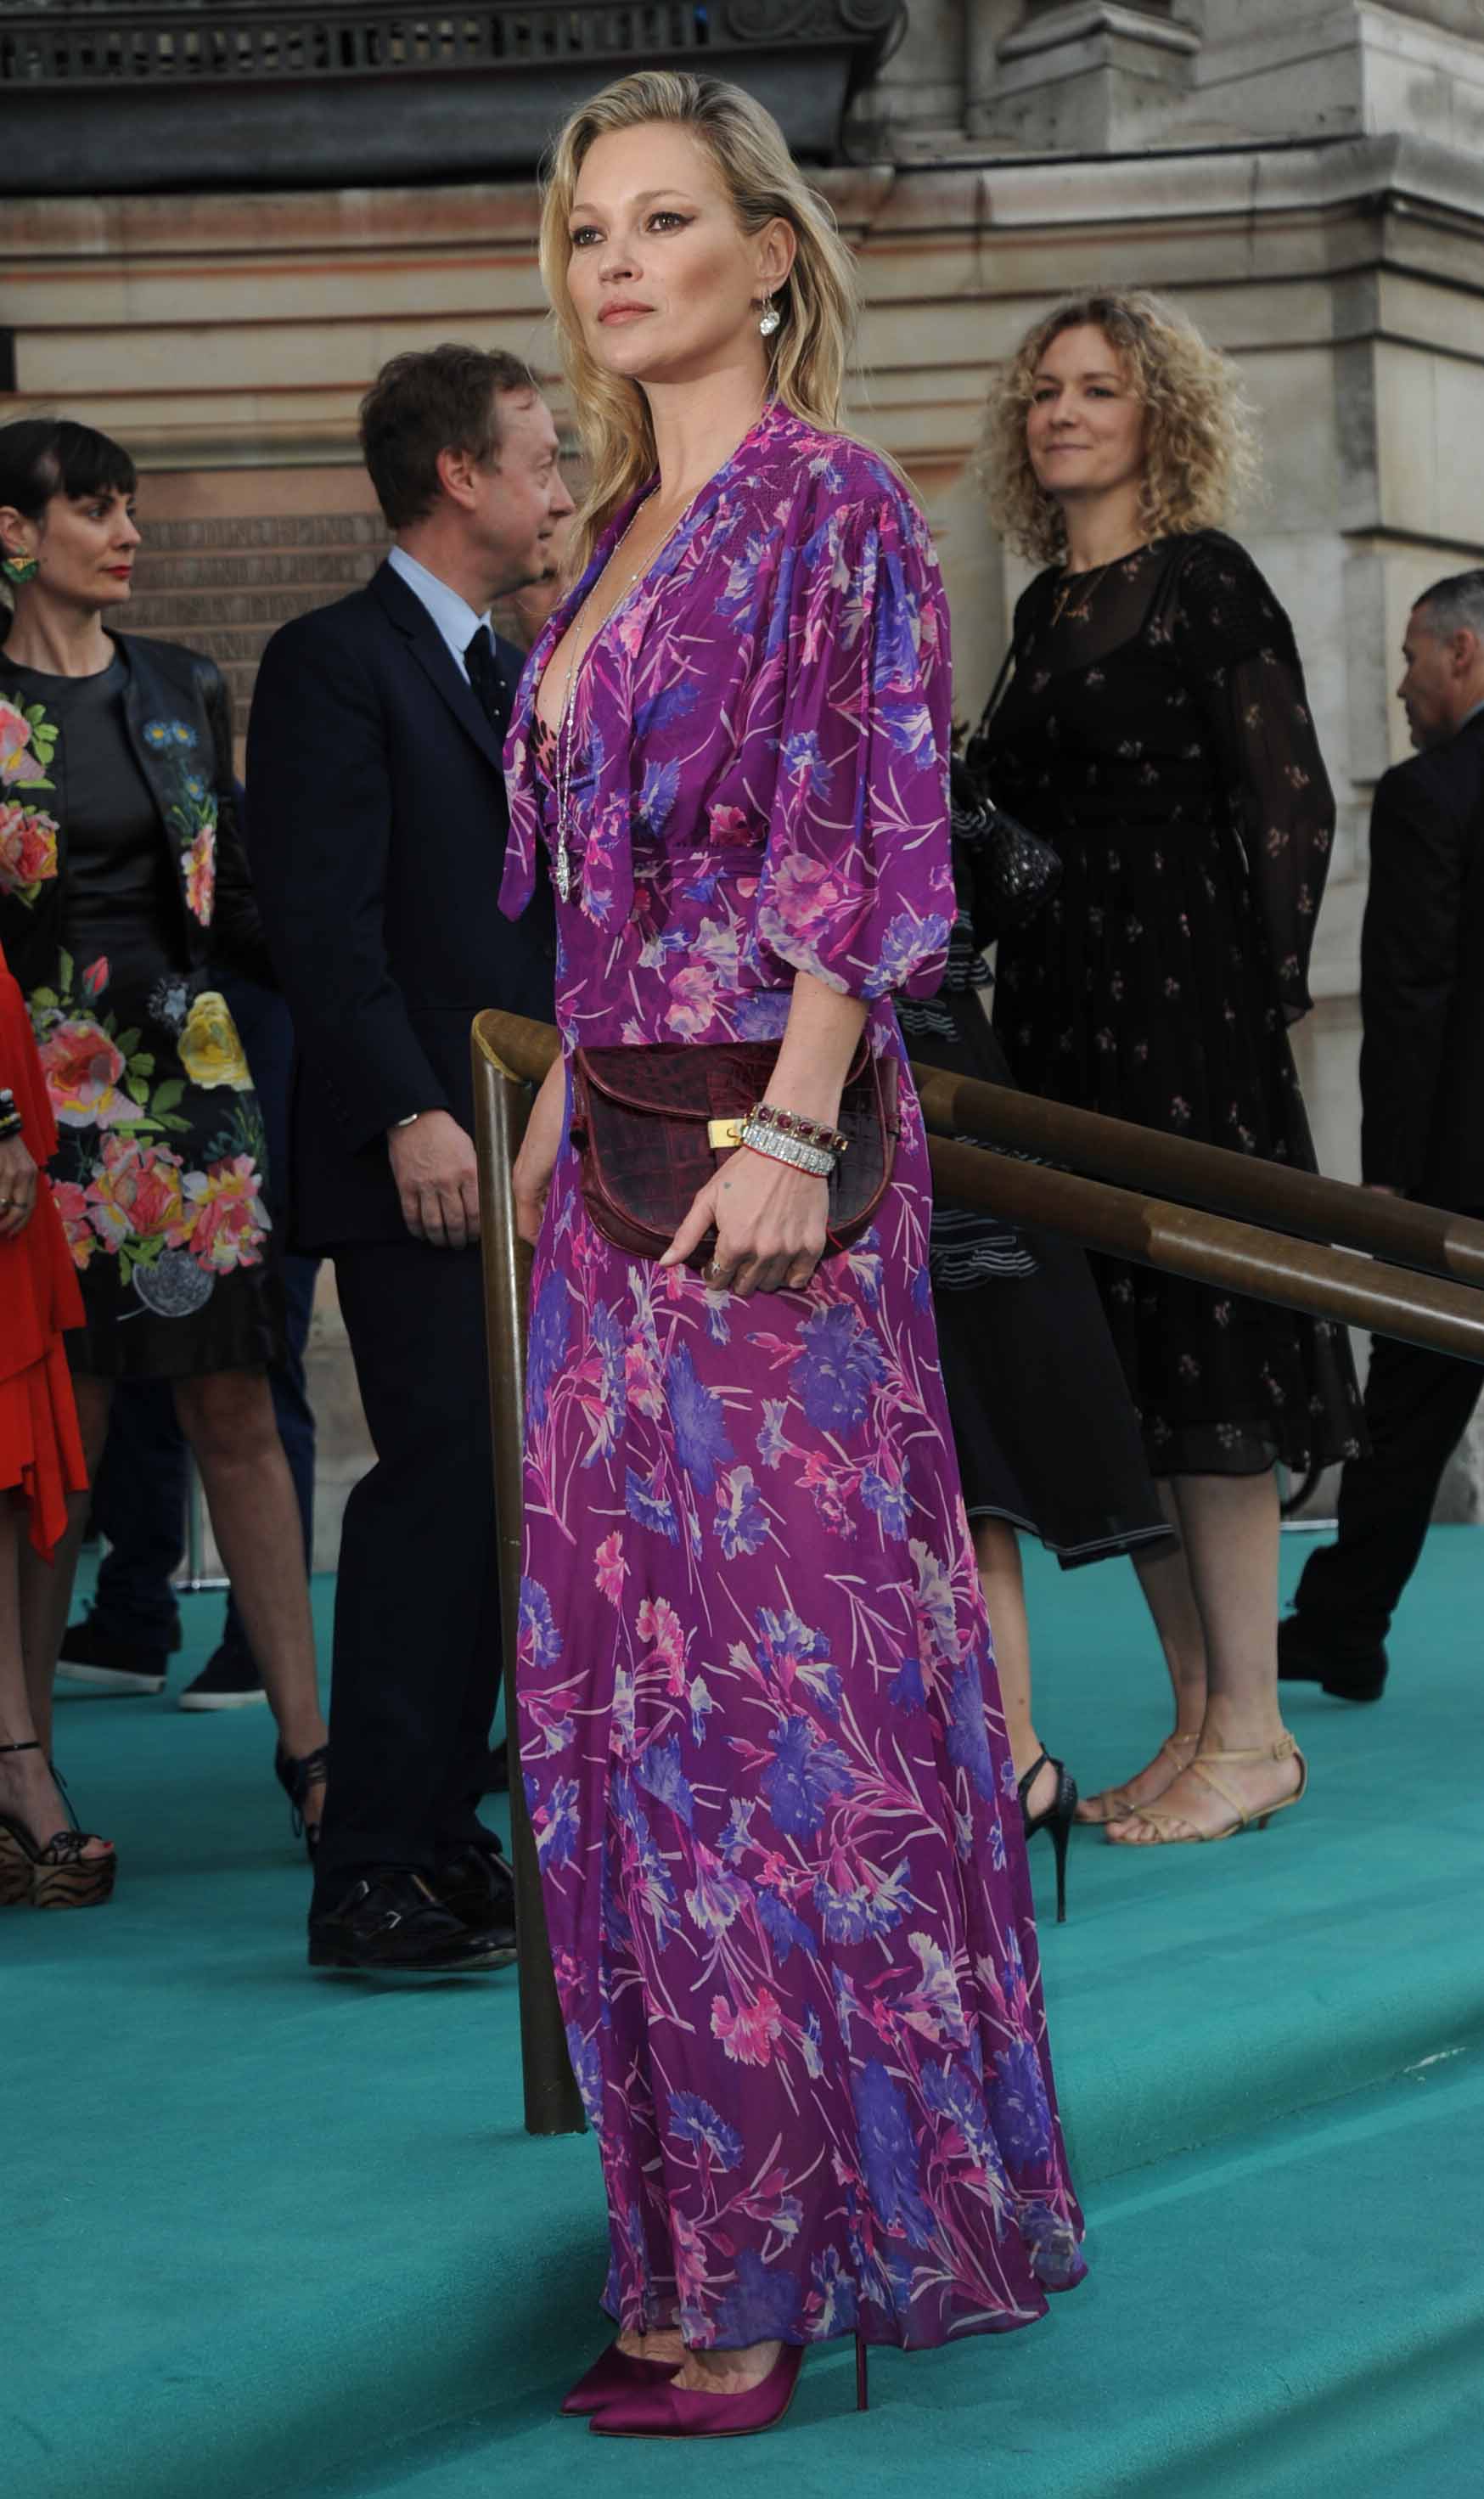 Kate Moss, Victoria and Albert Museum Summer Party, inaugural 'Met Gala' style fundraising benefit. Expect a seriously A-list crowd. Event hosted by Condé Nast president Nicholas Coleridge.